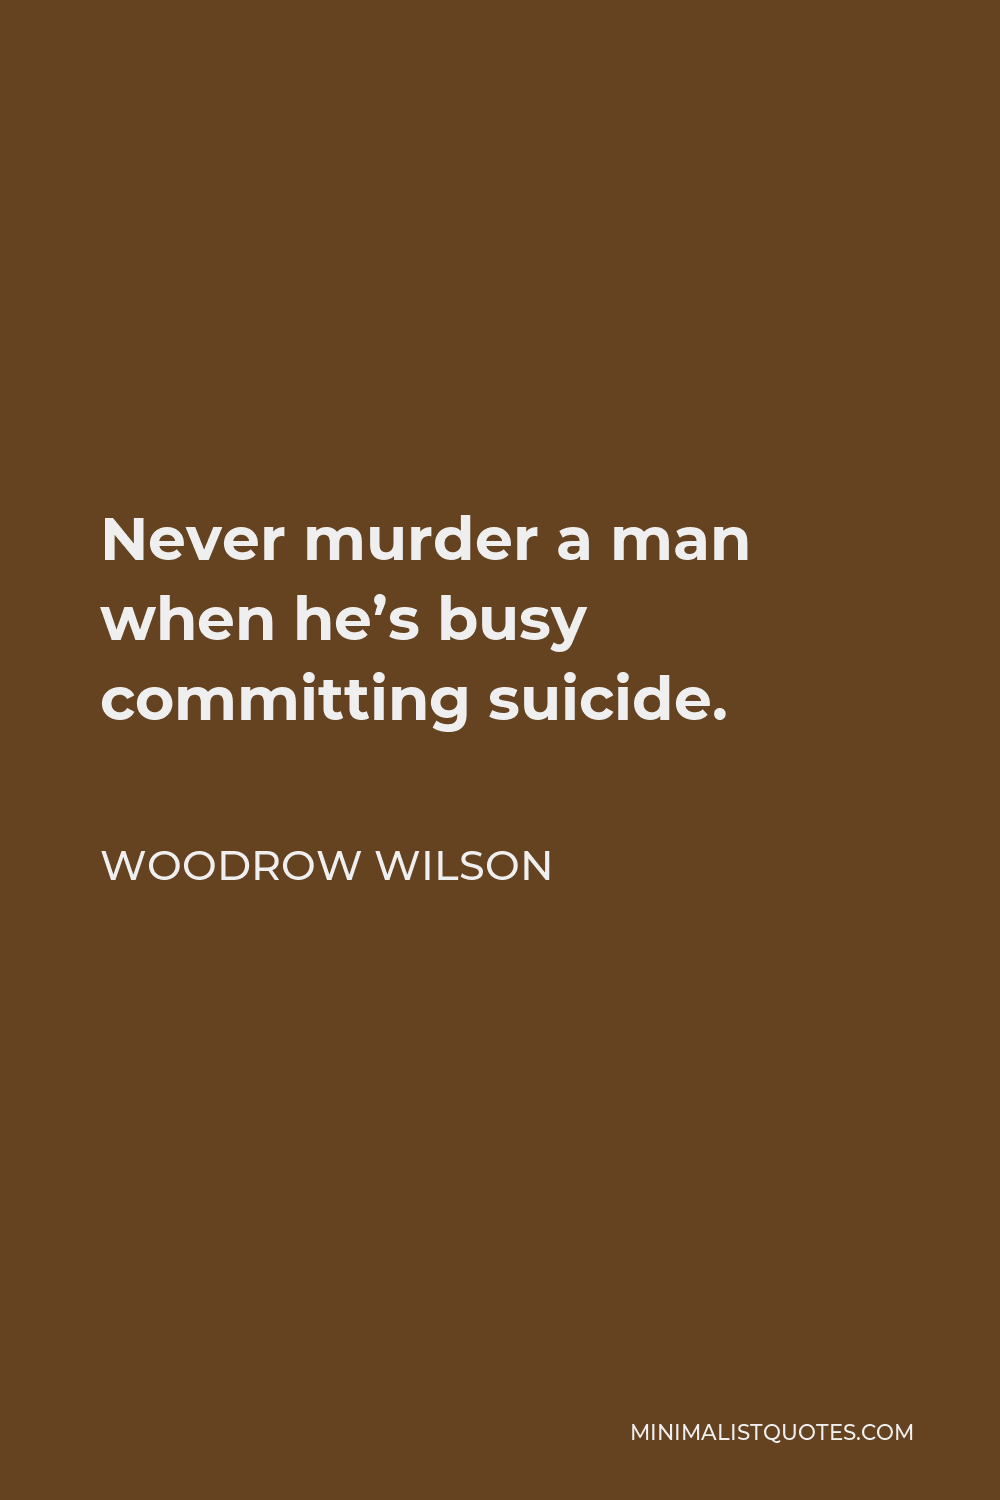 Woodrow Wilson Quote - Never murder a man when he’s busy committing suicide.